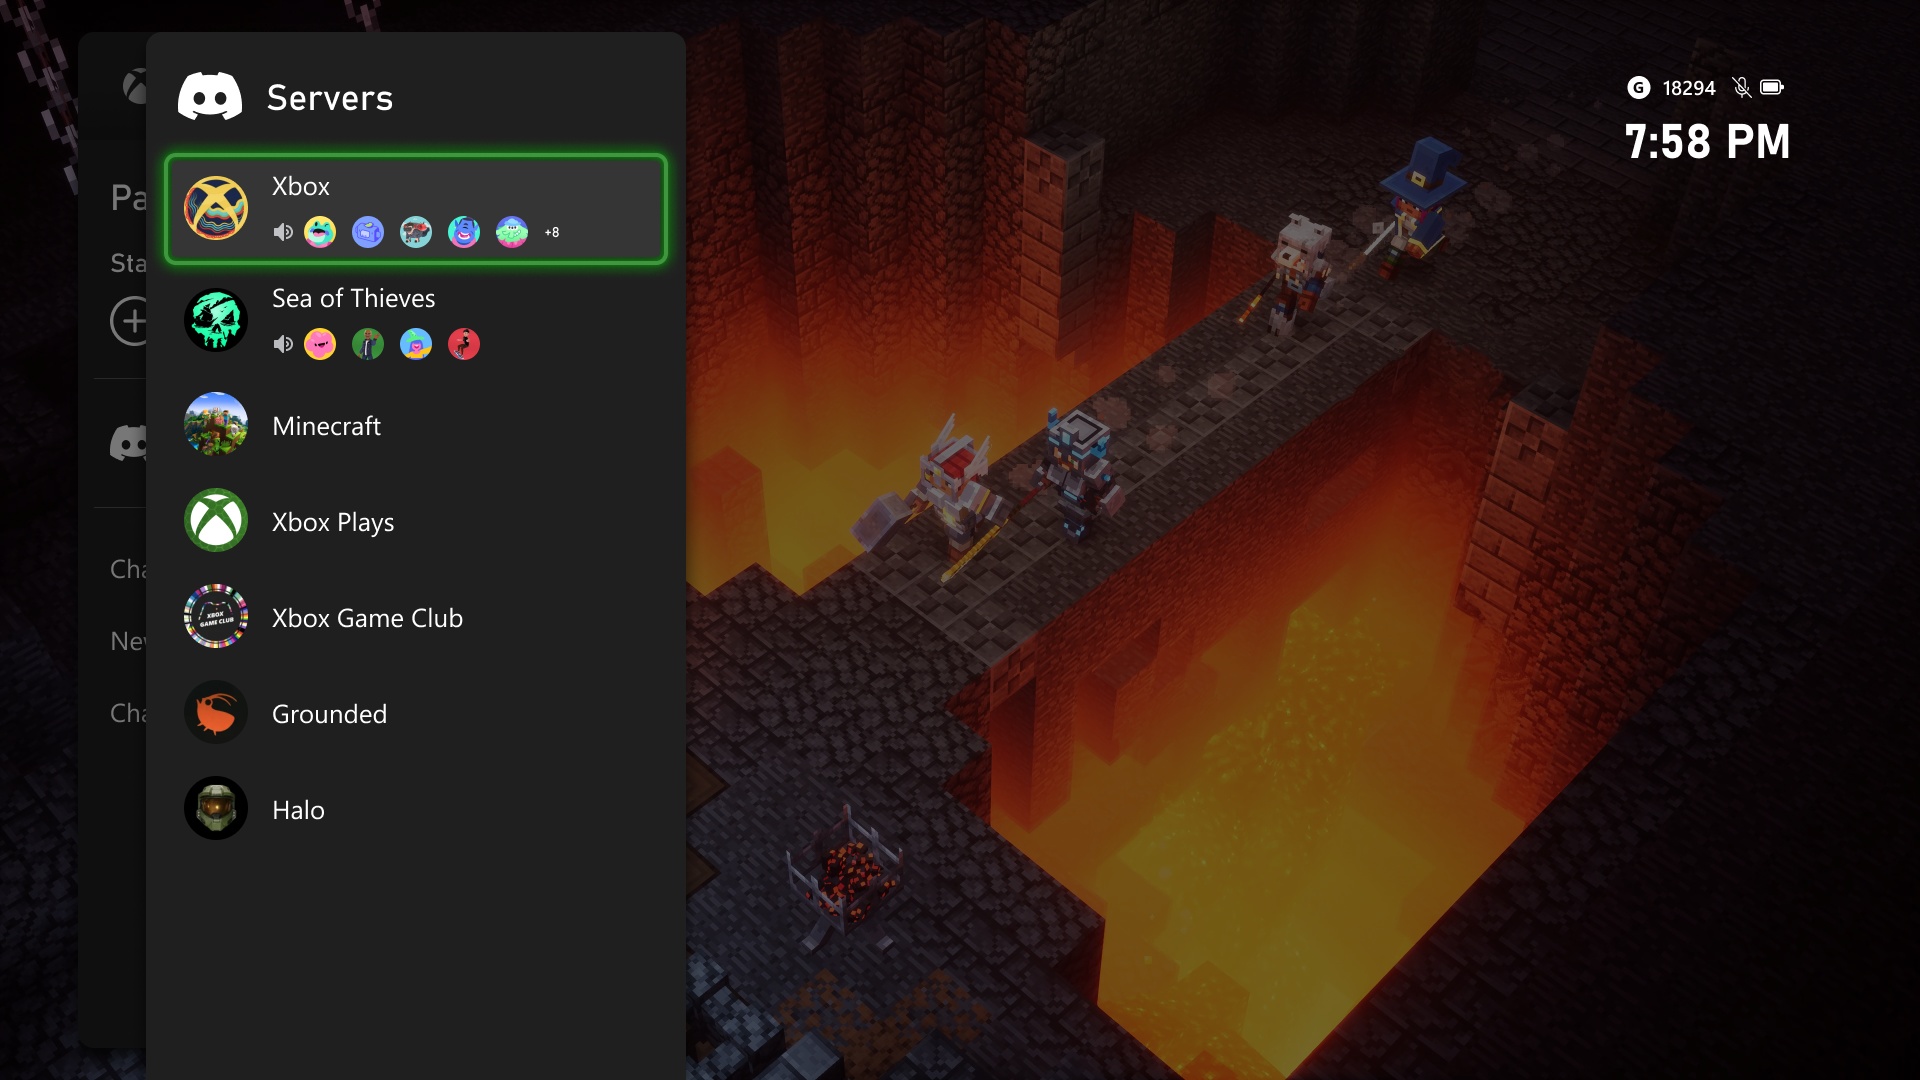 Now Available: Stream Your Xbox Games Directly to Discord